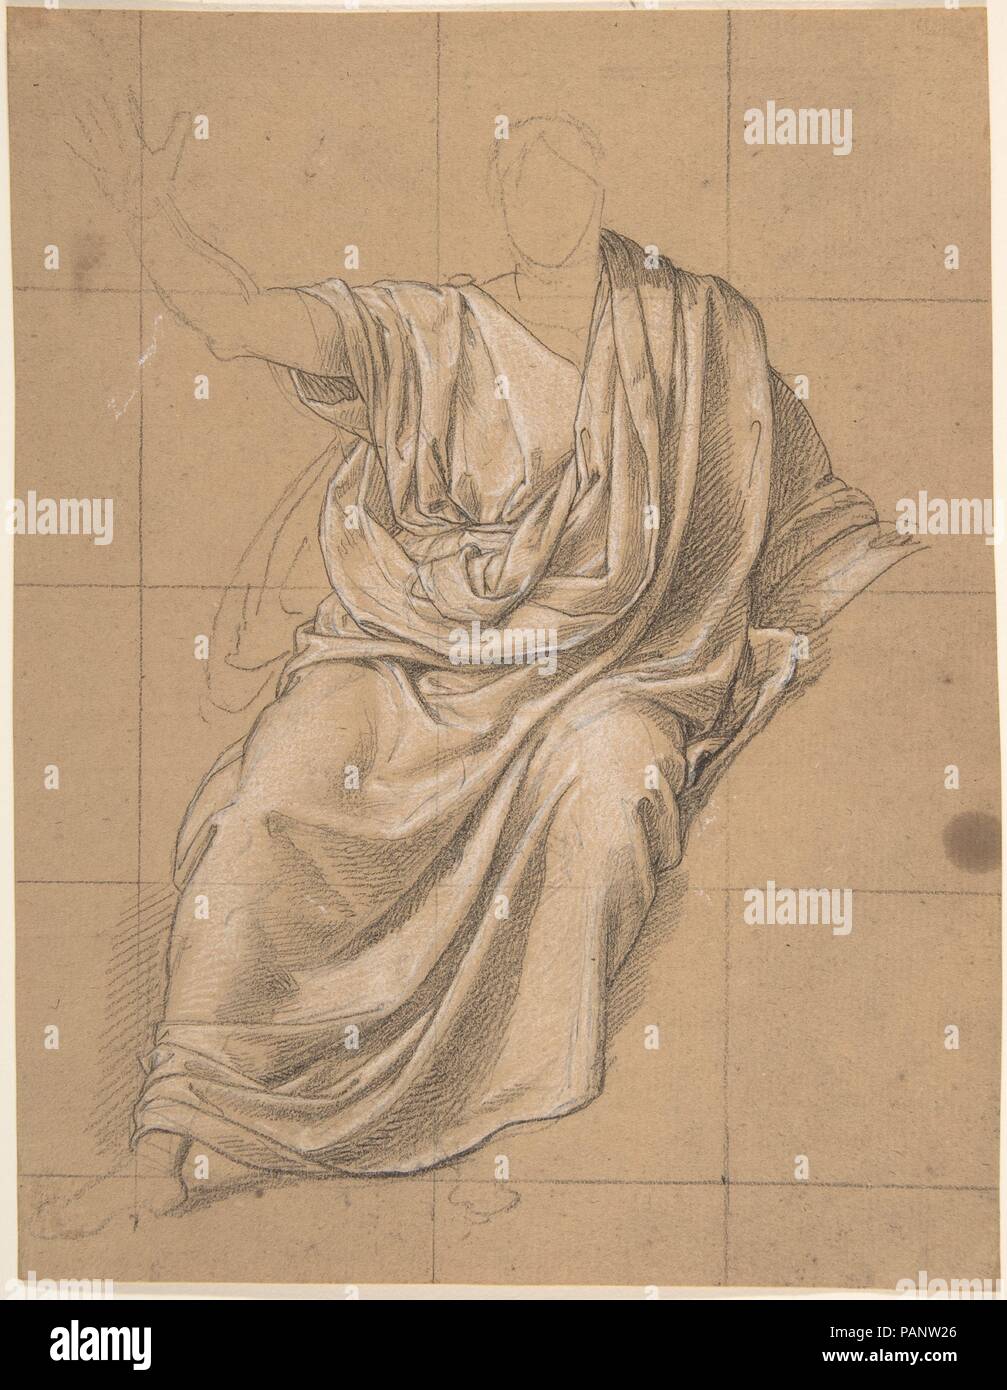 Study of Drapery. Artist: Jean-Baptiste Joseph Wicar (French, Lille 1762-1834 Rome). Dimensions: 8 1/2 x 6 9/16 in.  (21.6 x 16.7 cm). Date: 1818.  Through careful shading, subtle white highlights, and reserved blank areas, Wicar conveys the intricate folds of toga fabric gathered, tucked, and draped around the model. As the squaring of the sheet suggests, this drawing was made in preparation for a painting, specifically for the figure of Augustus who appears at the center of Virgil Reading the Aeneid to Augustus and Livia (1818), commissioned by Count Giovanni Battista Sommariva (1760-1826) f Stock Photo